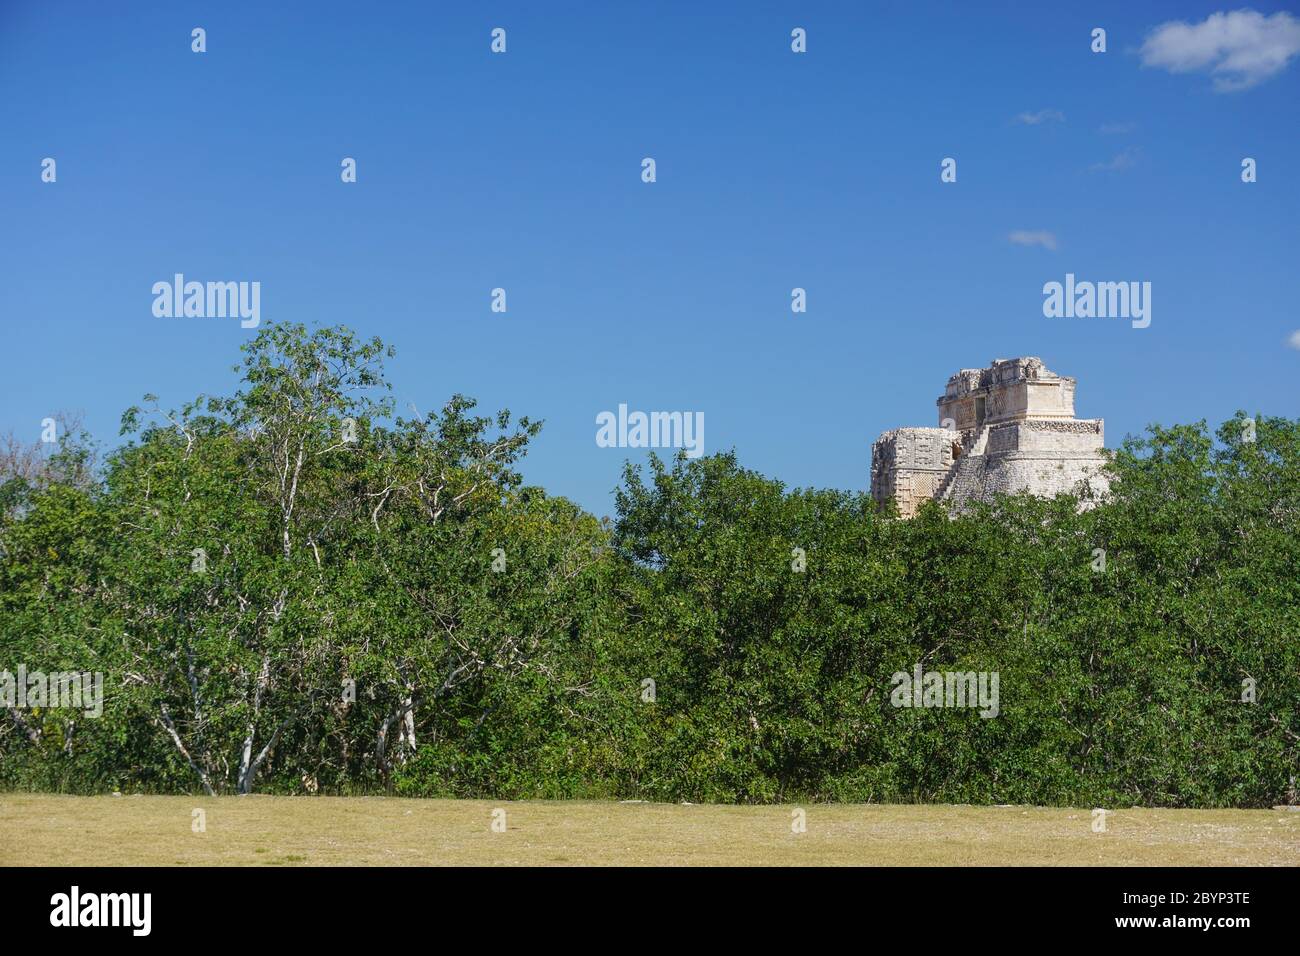 Uxmal, Mexico: The Mayan Pyramid of the Magician, also known as The Pyramid of the Dwarf, 600-900 A.D., rising above the trees. Stock Photo